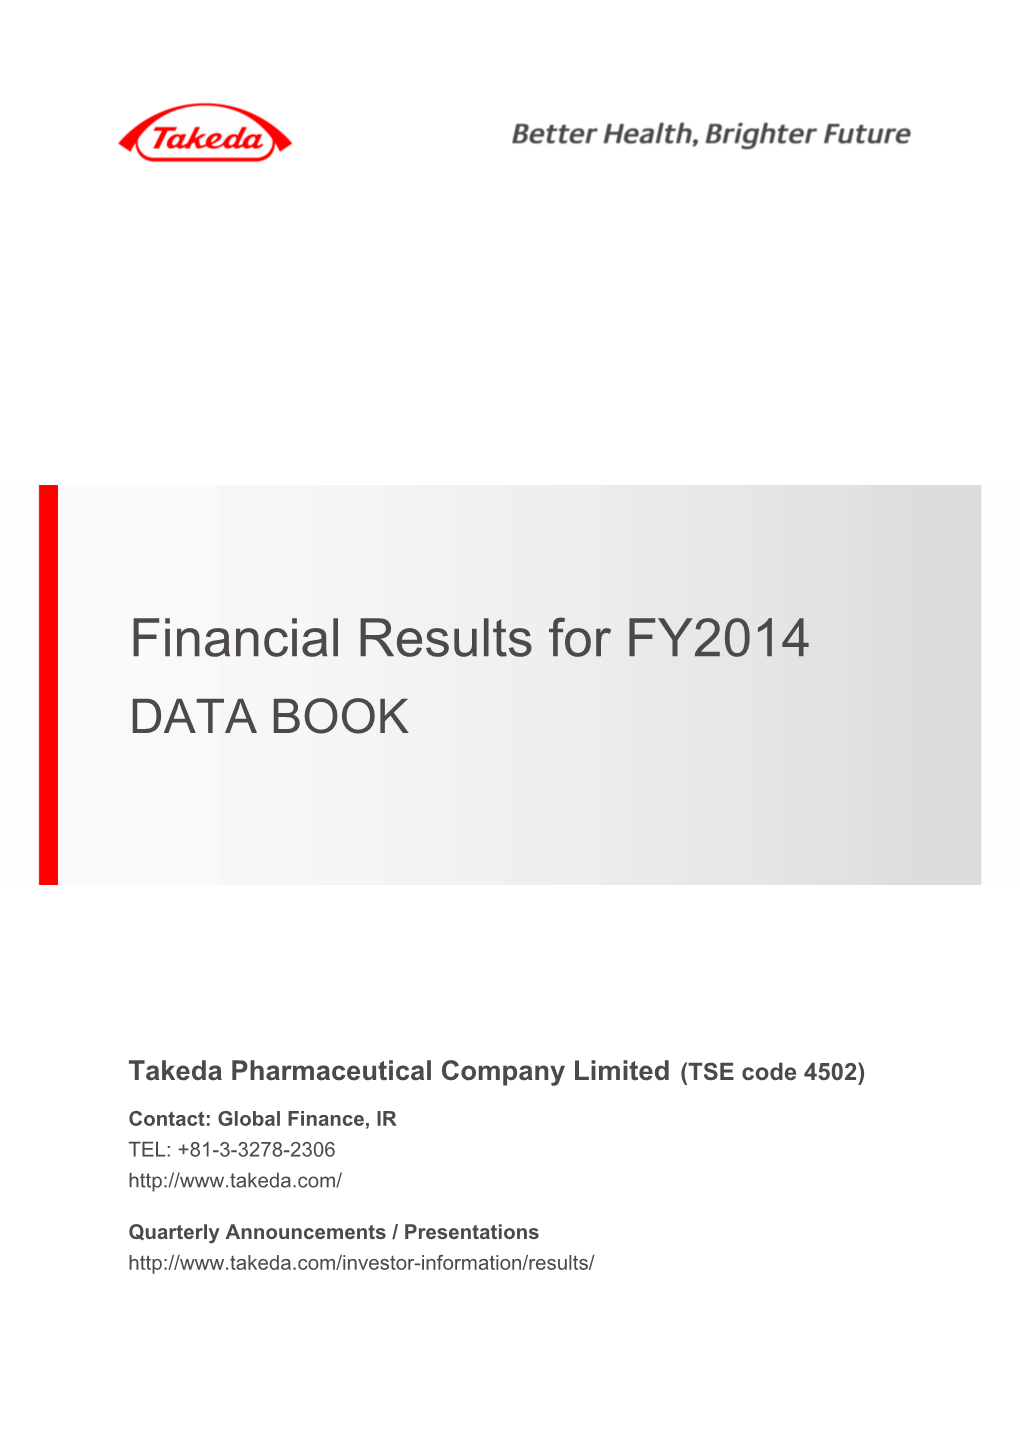 Financial Results for FY2014 DATA BOOK